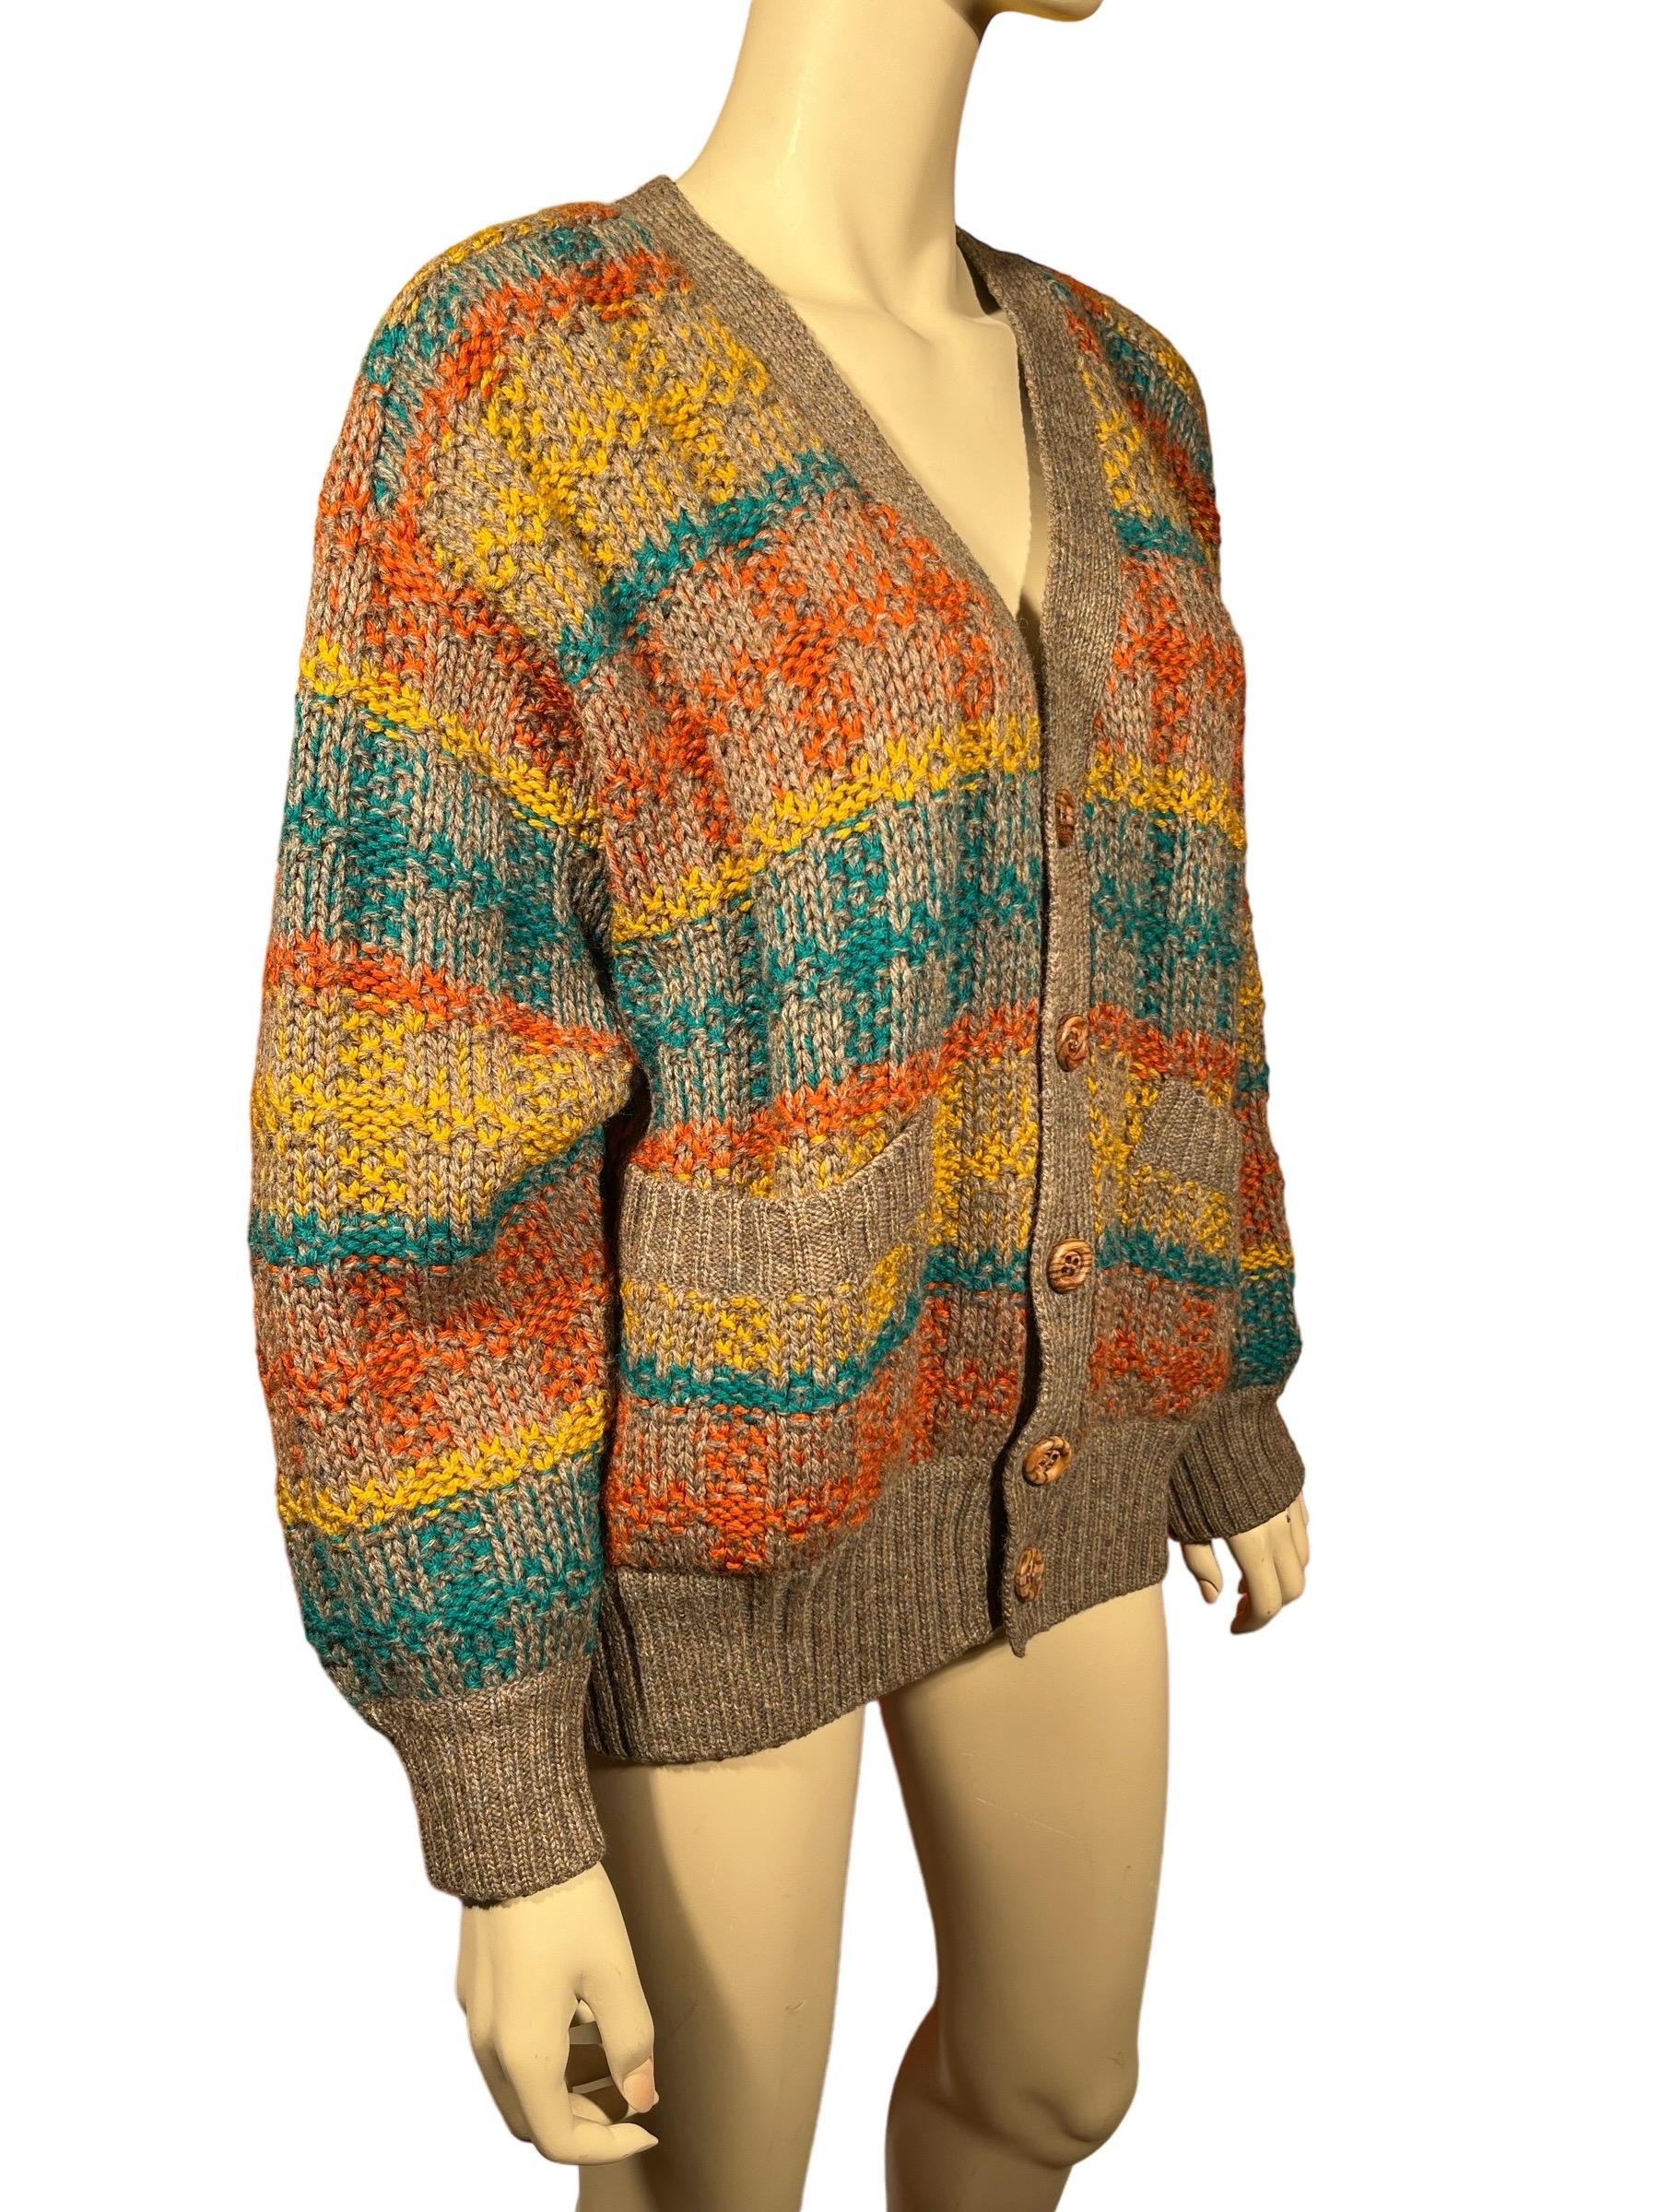 The Italian knitwear house Missoni has its roots in the small knitting business that newlyweds Ottavio (b. 1921) and Rosita (b. 1931) Missoni started in 1953. For several years they sold their sweaters to department stores and in 1958 started